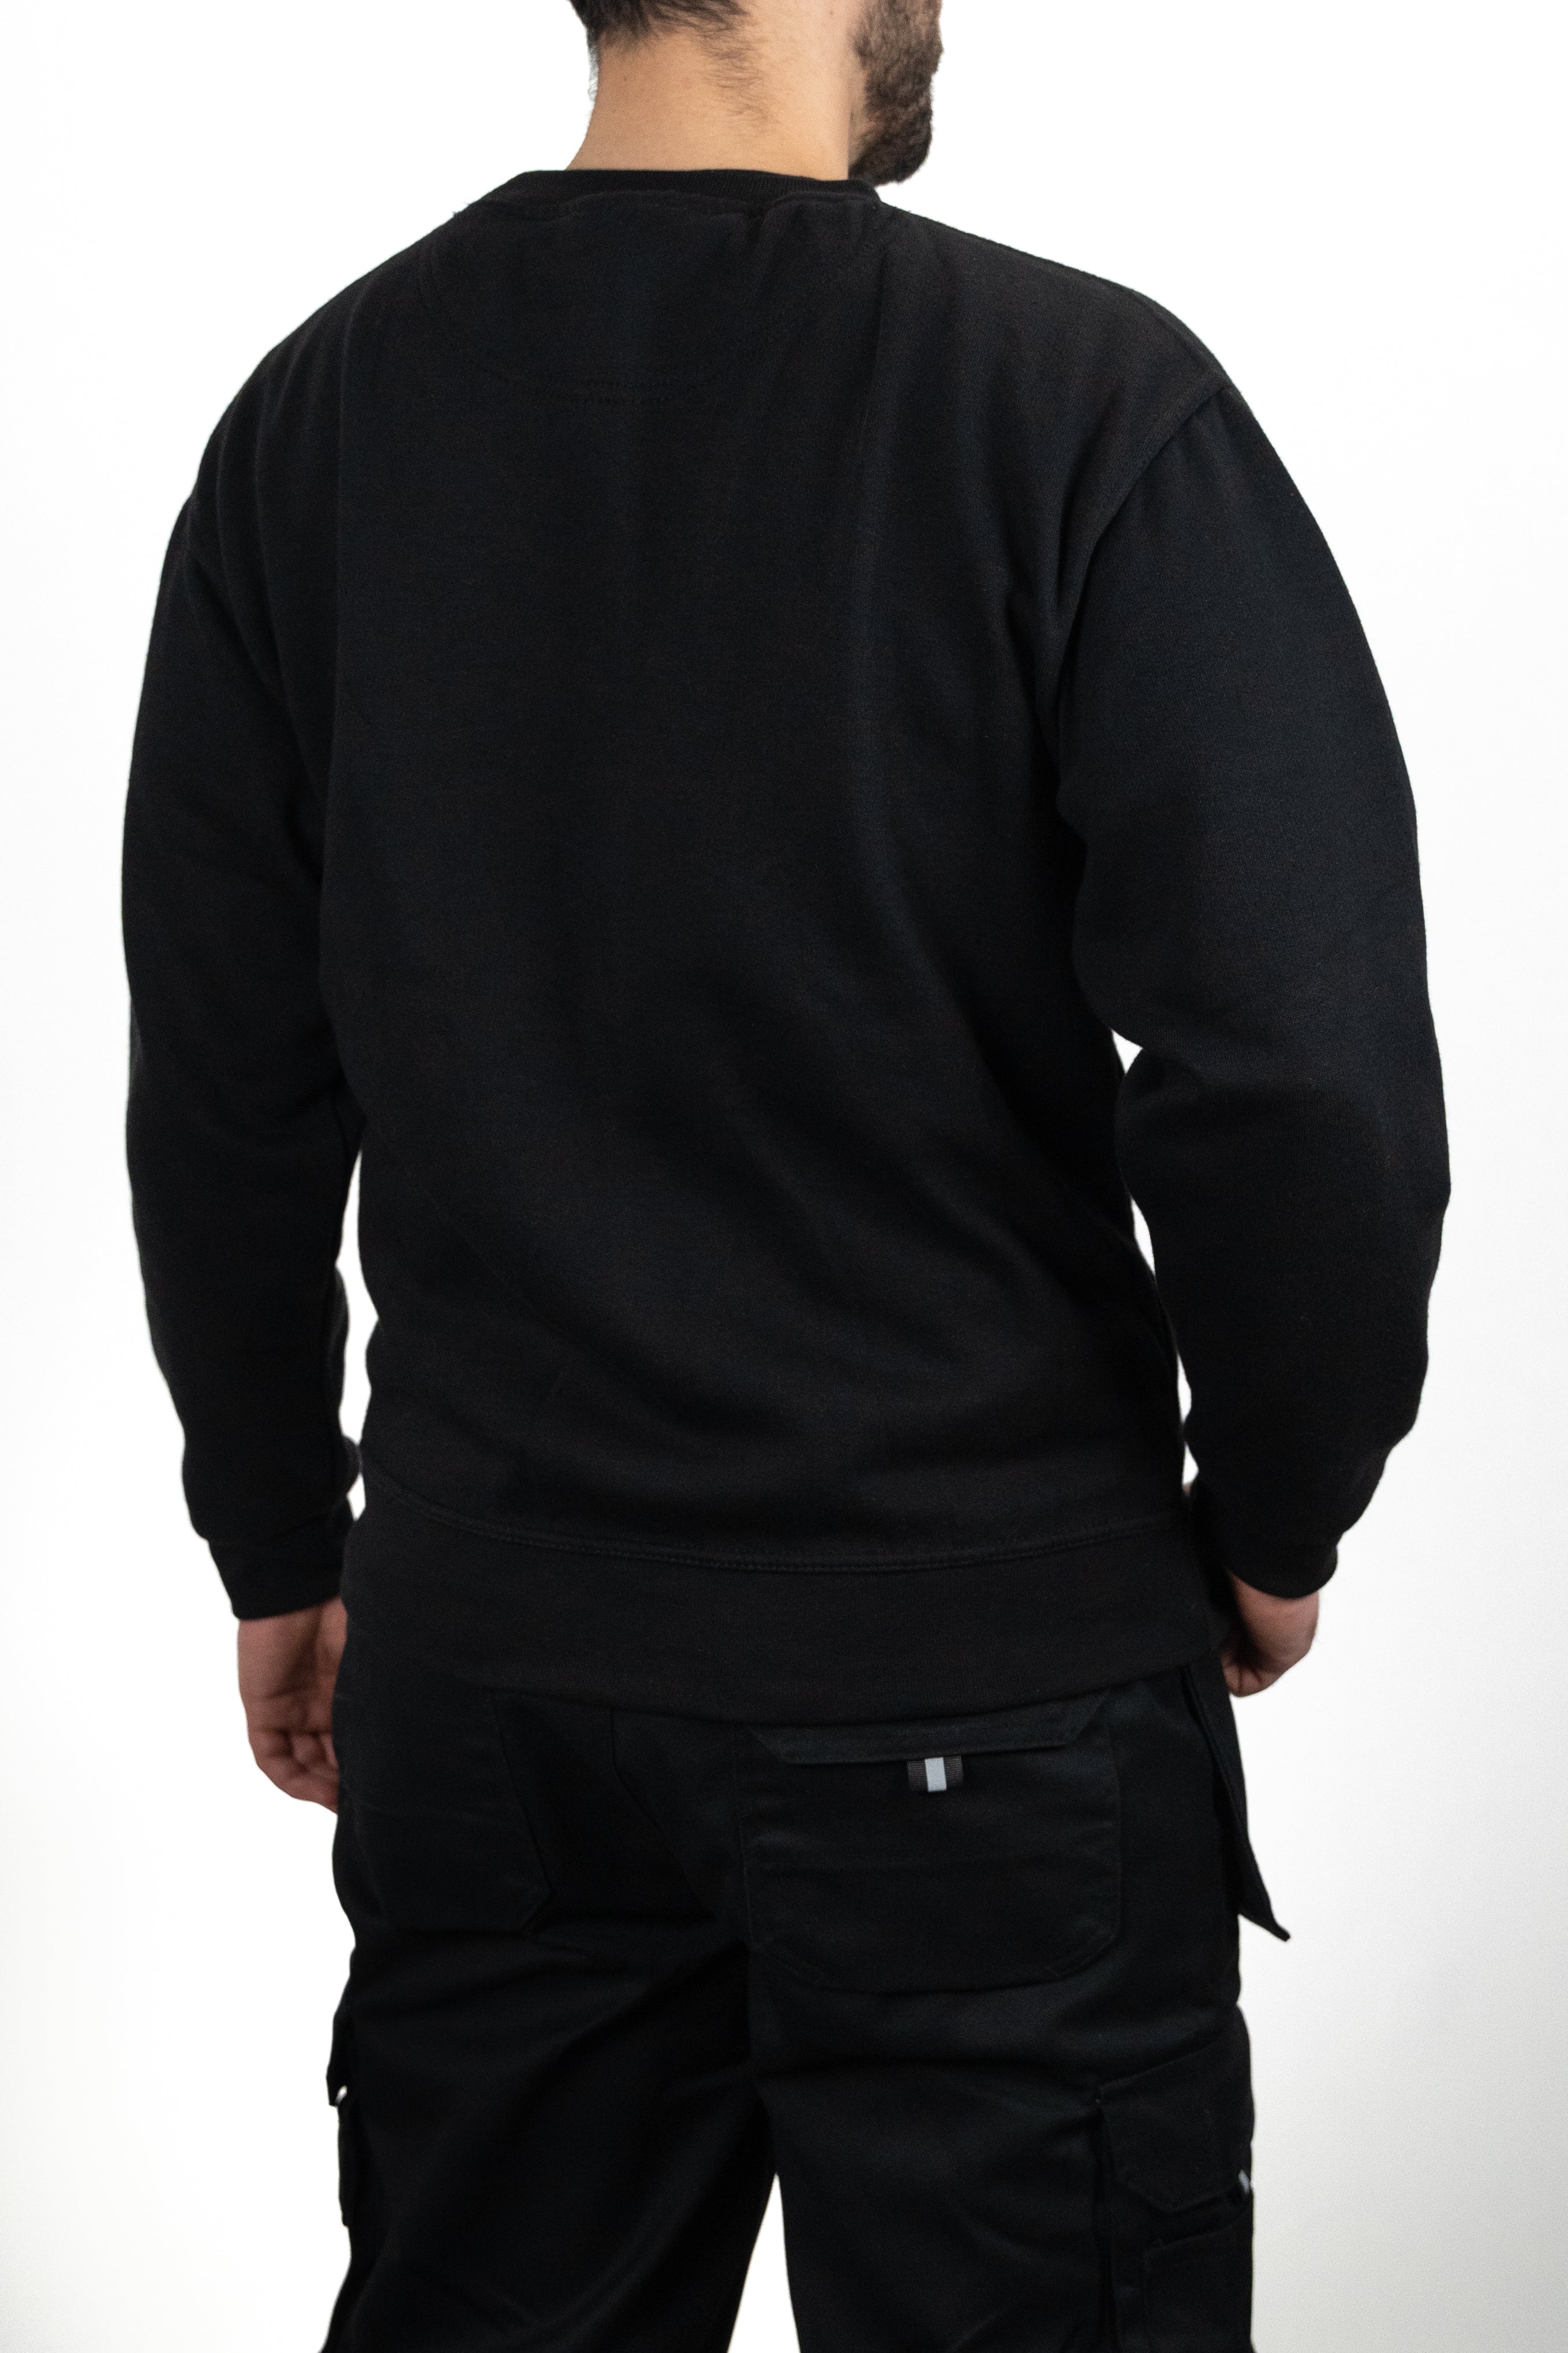 rear view of the mens black work jumper